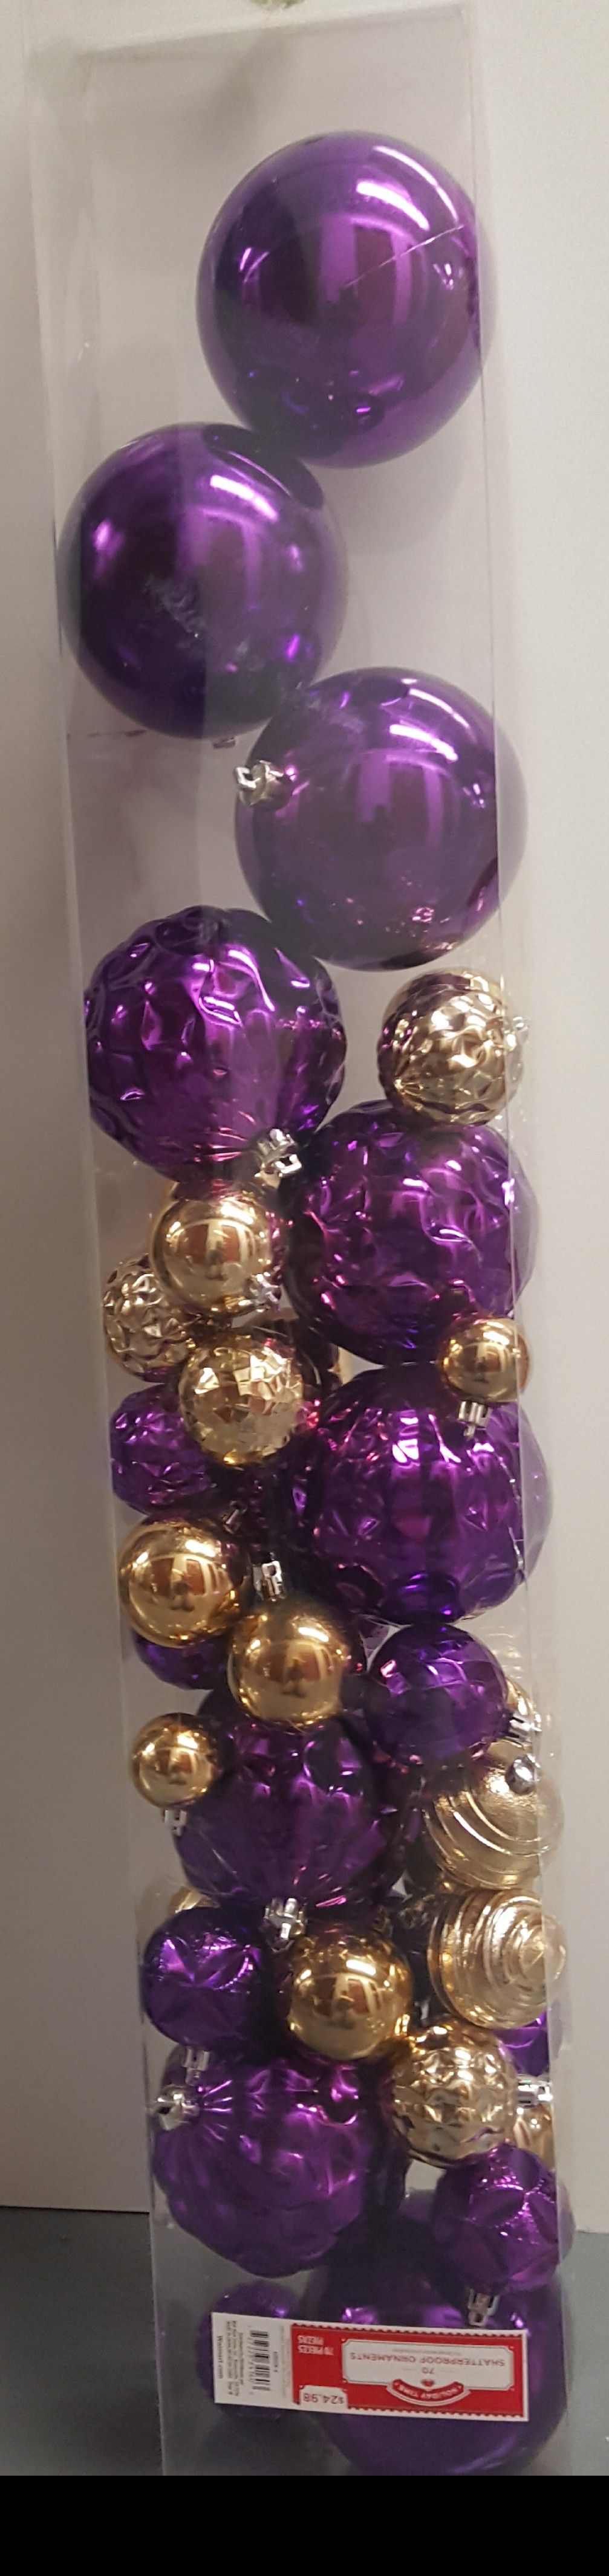 Purple and gold ornaments